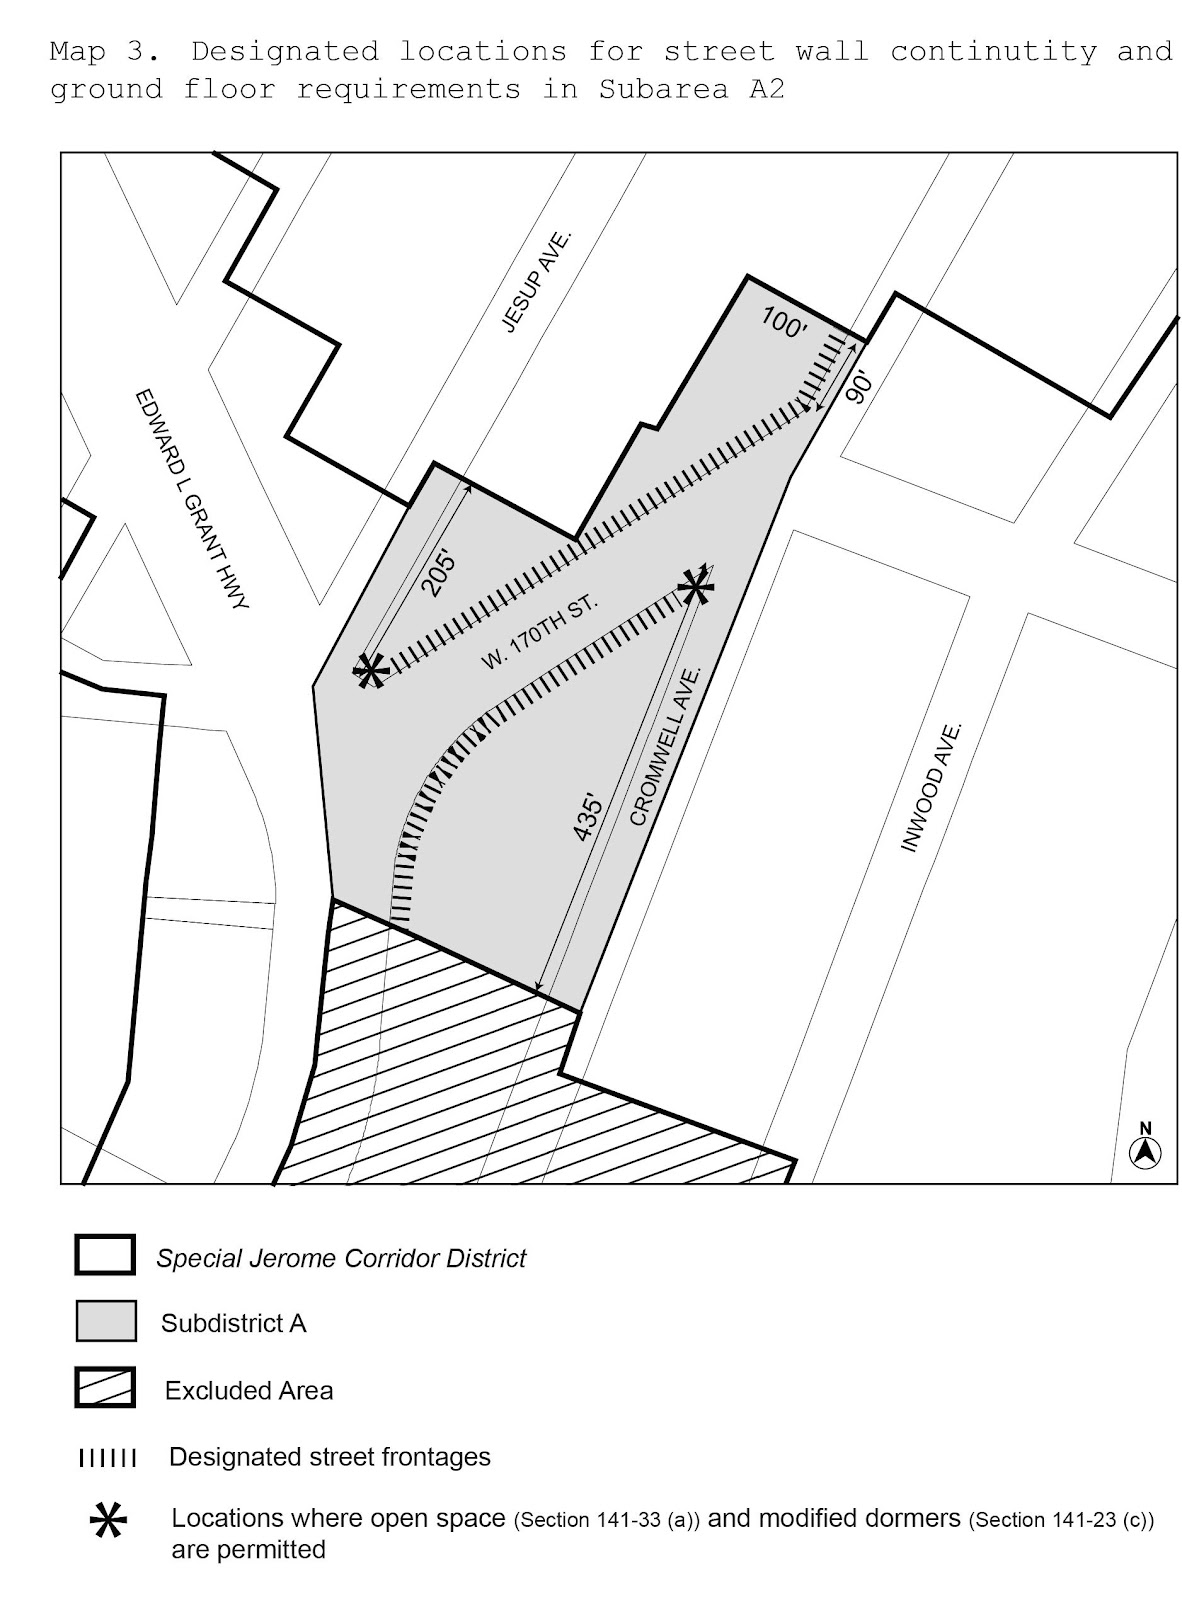 Zoning Resolutions Chapter 1: Special Jerome Corridor District APPENDIX.2